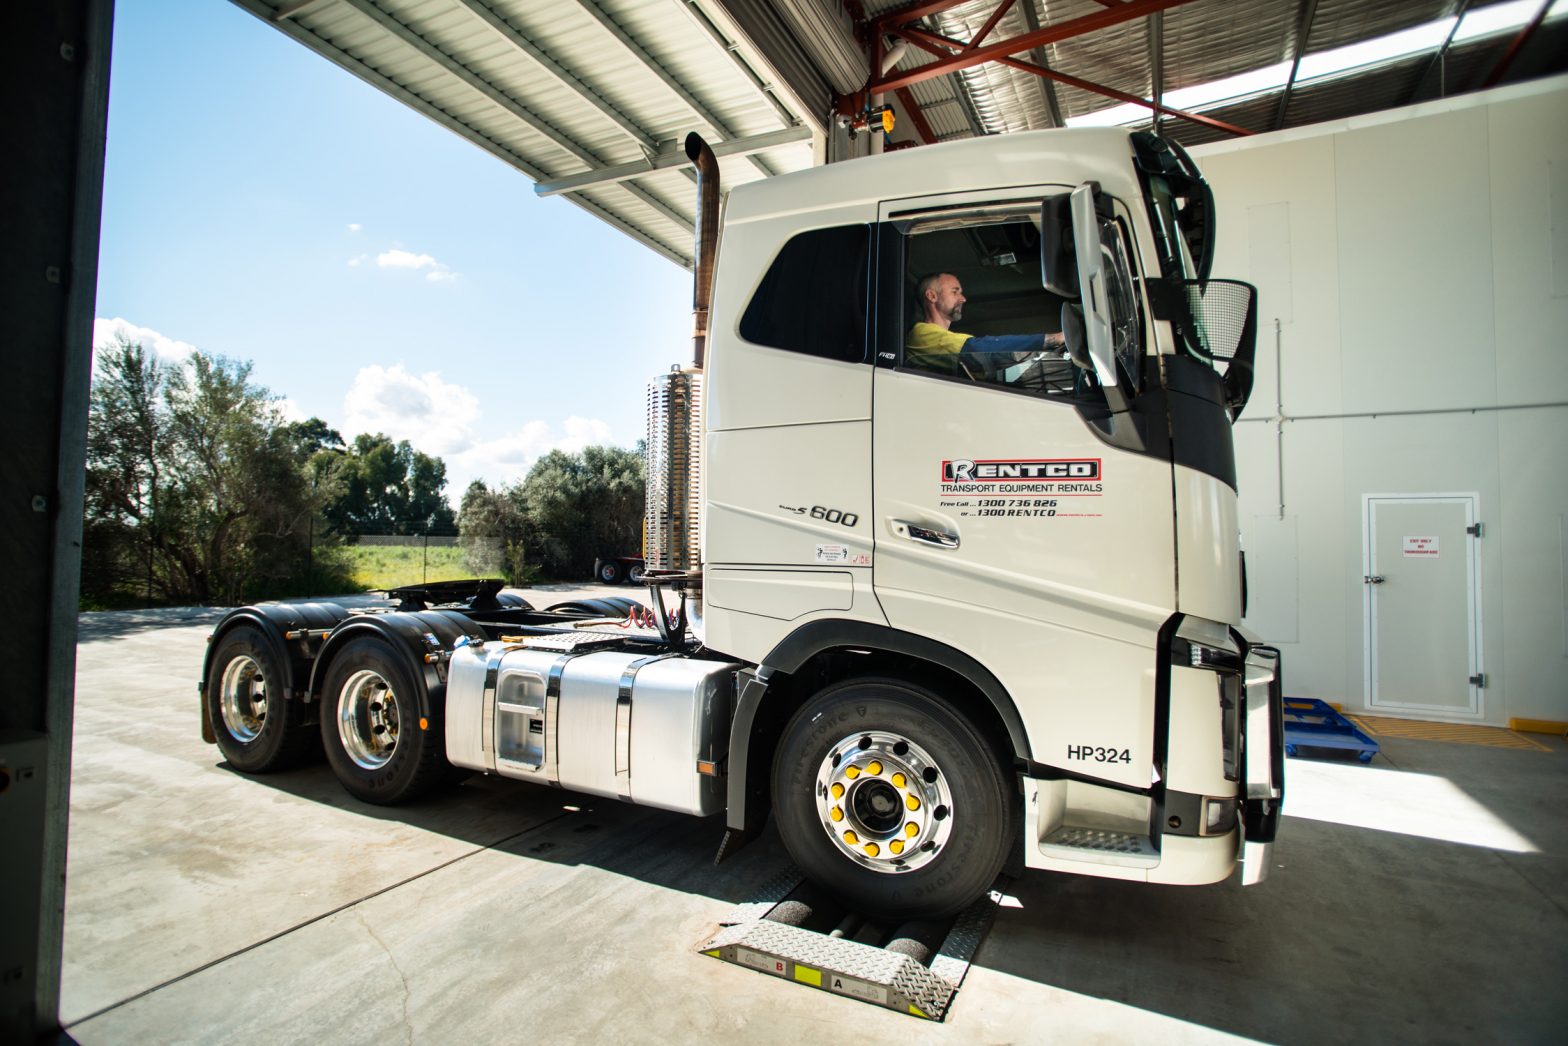 An employee drives a prime mover truck